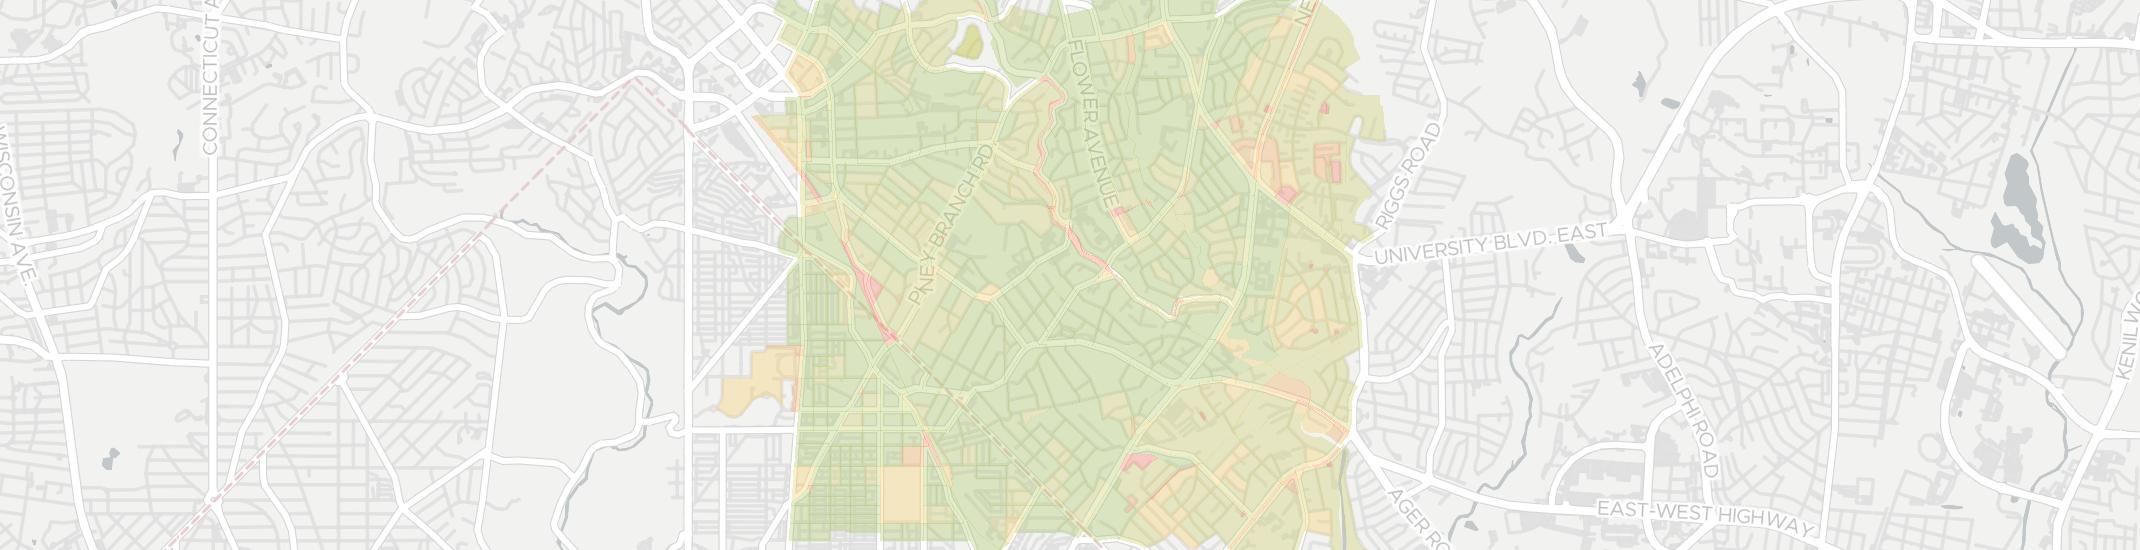 Takoma Park Internet Competition Map. Click for interactive map.